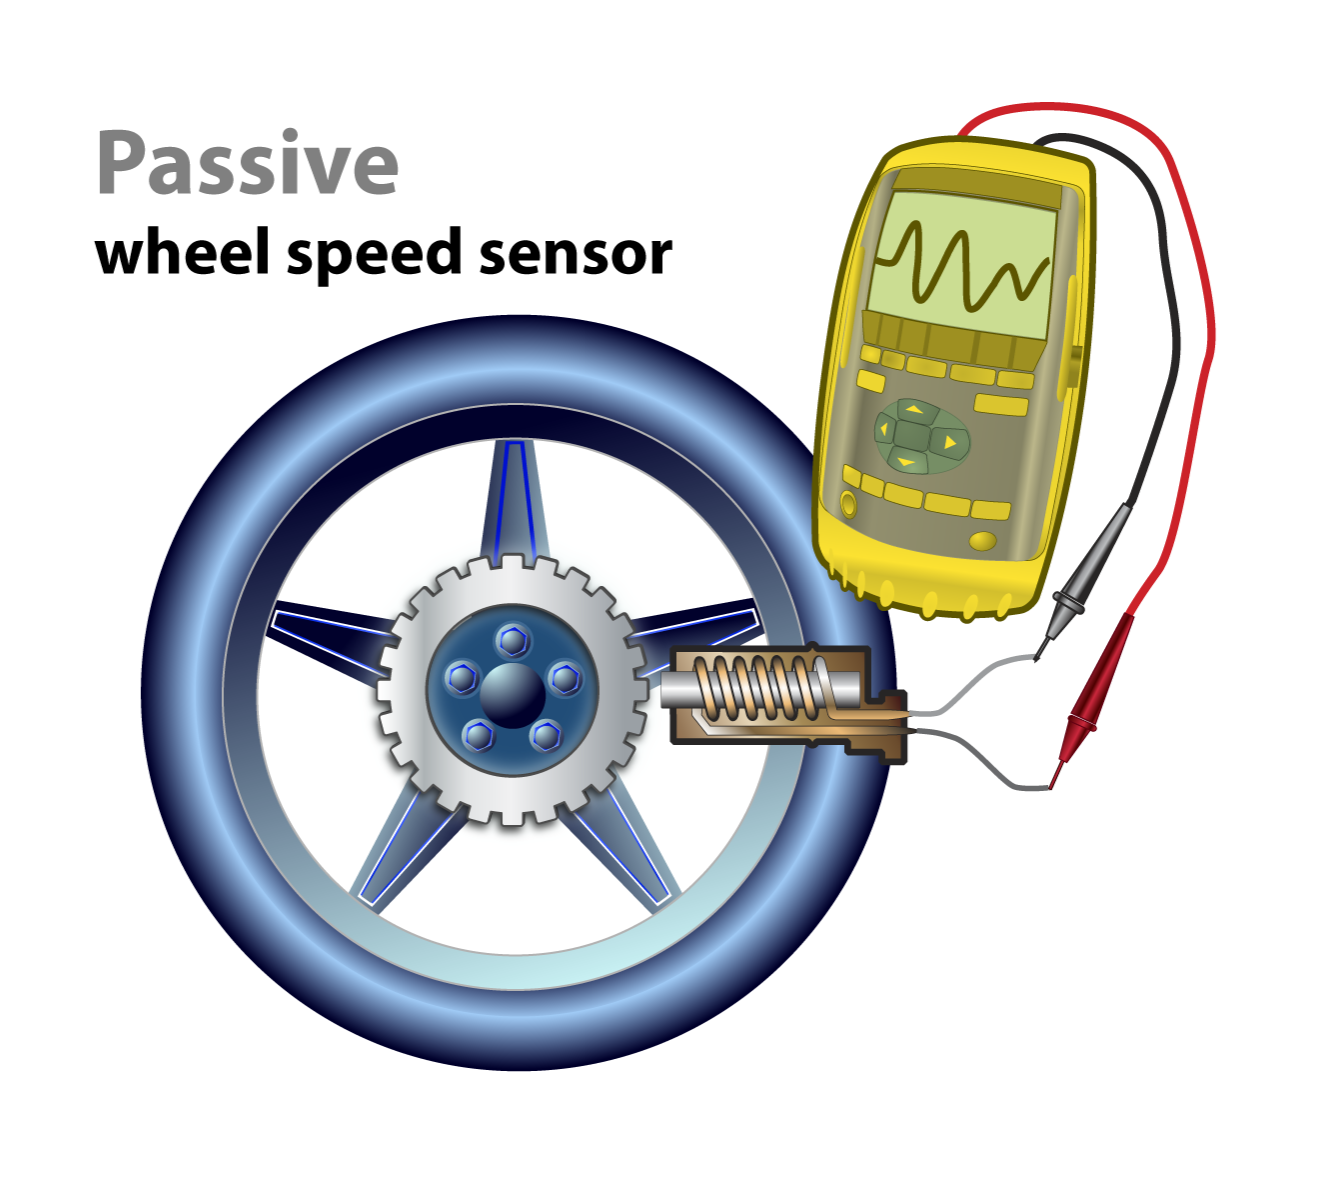 What is the purpose of the speed sensor? The speed sensors